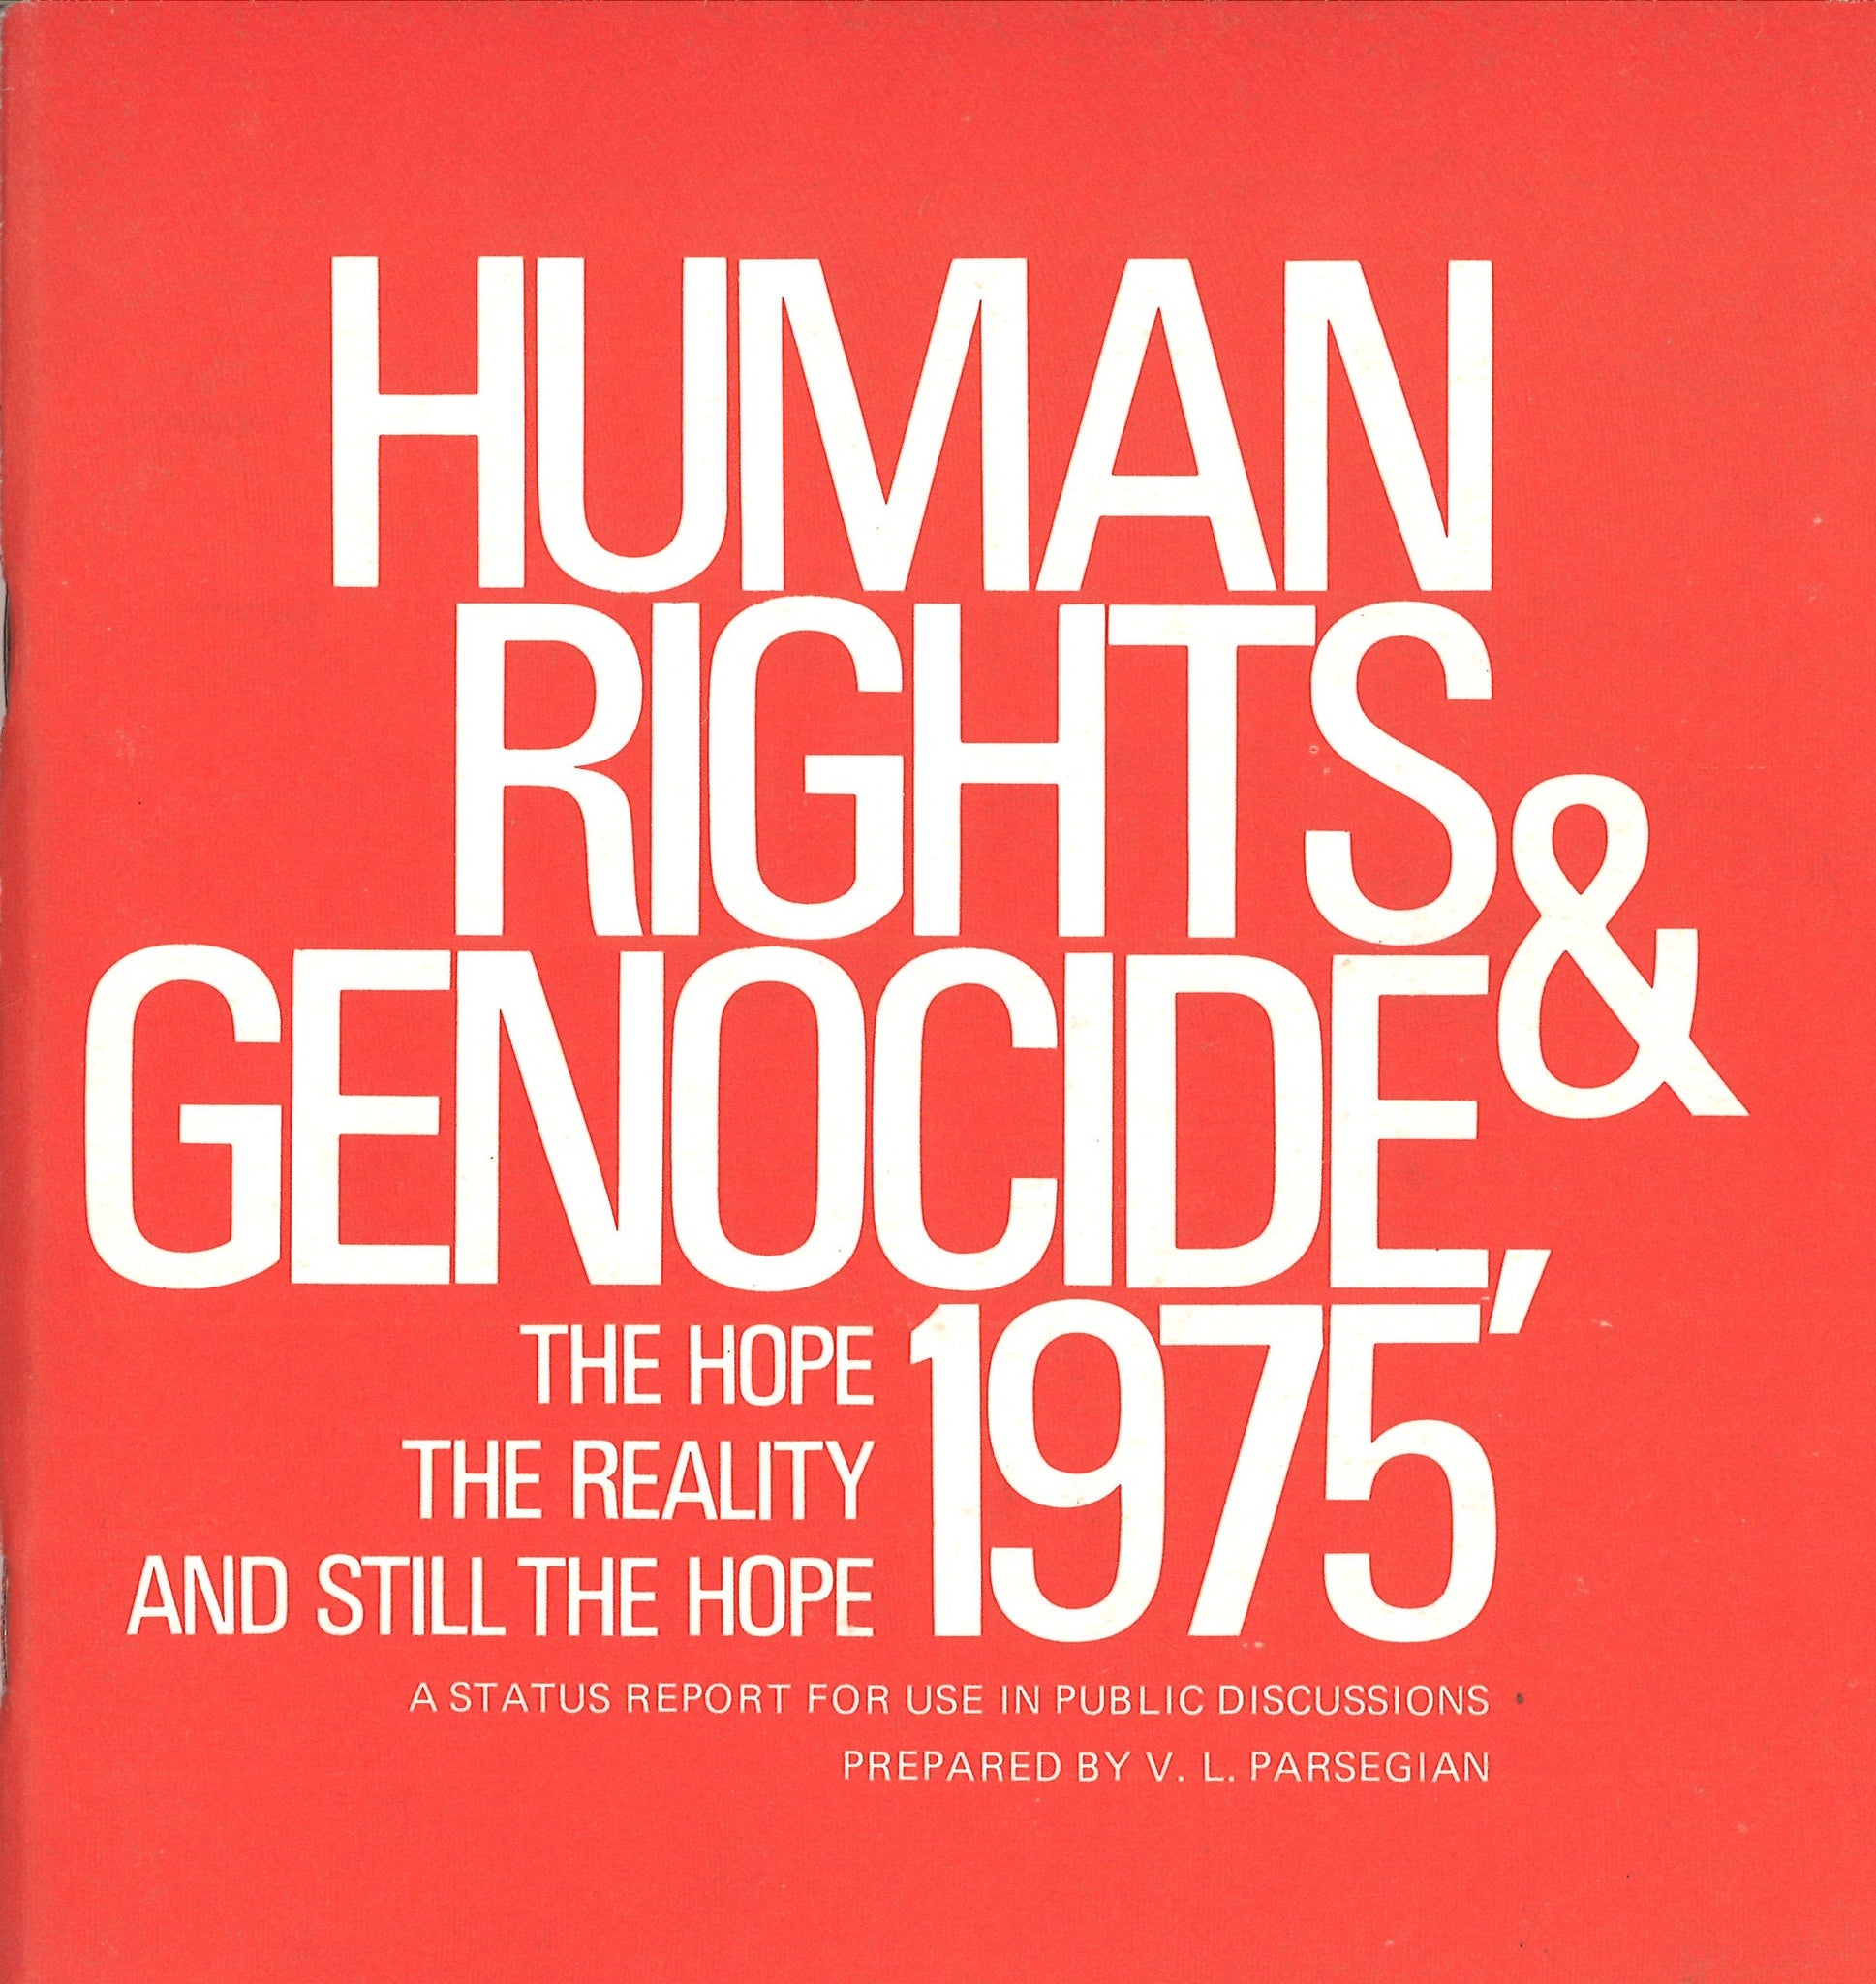 HUMAN RIGHTS AND GENOCIDE, 1975: THE HOPE, THE REALITY, AND STILL THE HOPE